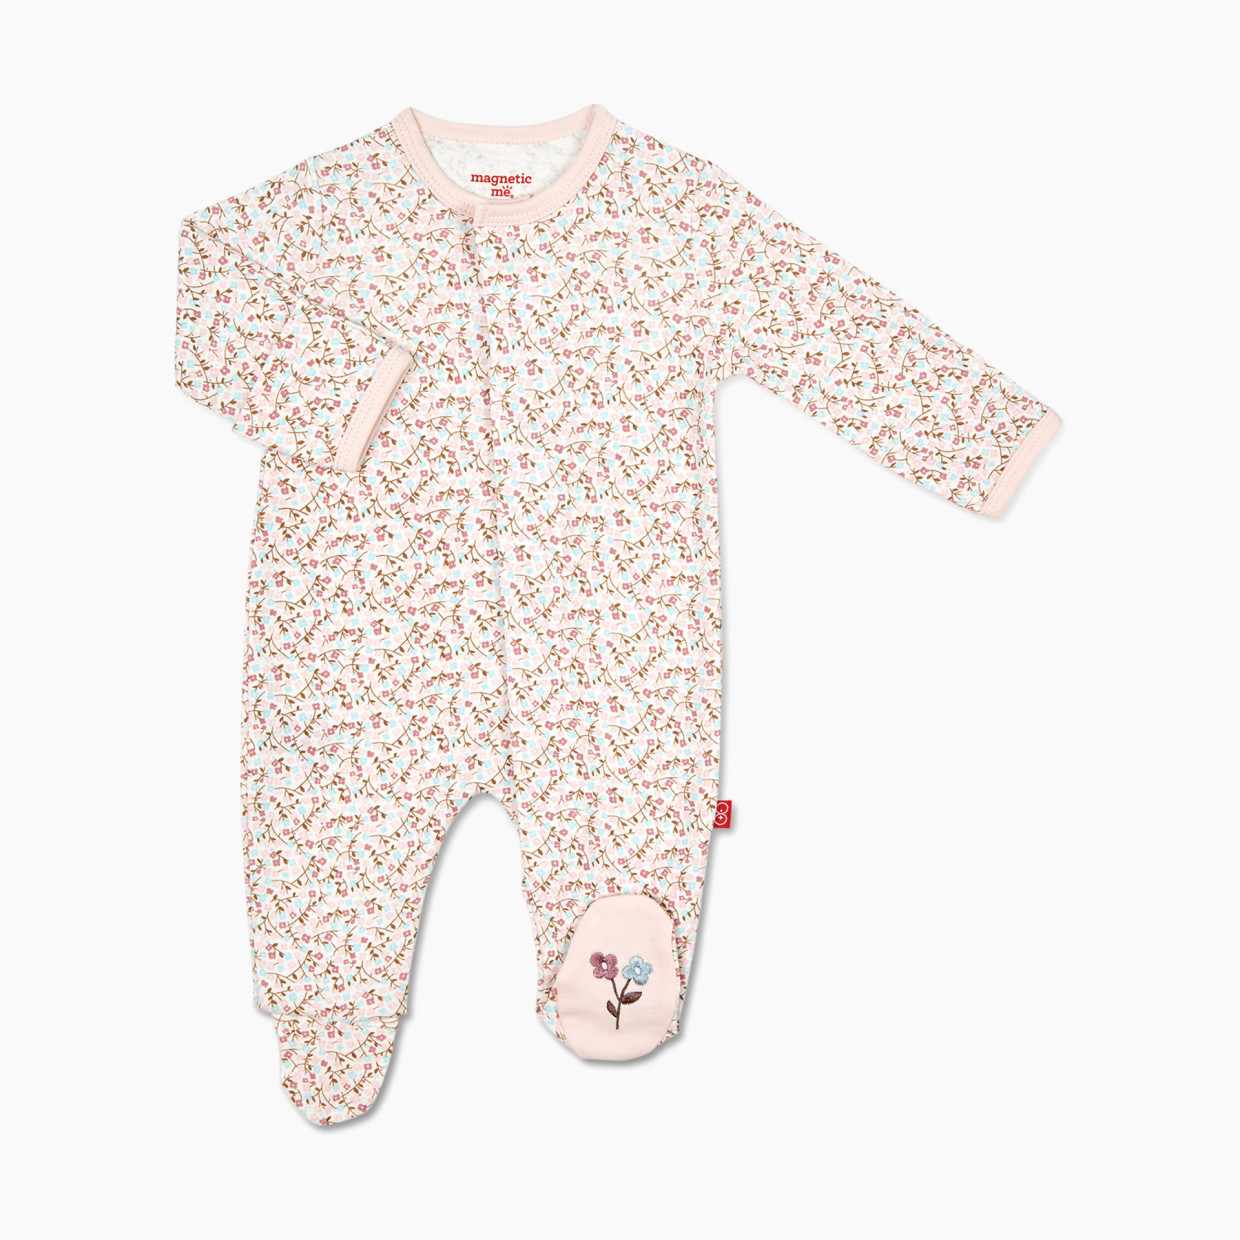 Magnificent Baby Organic Cotton Footie - Bedford Floral, 6-9 Months.